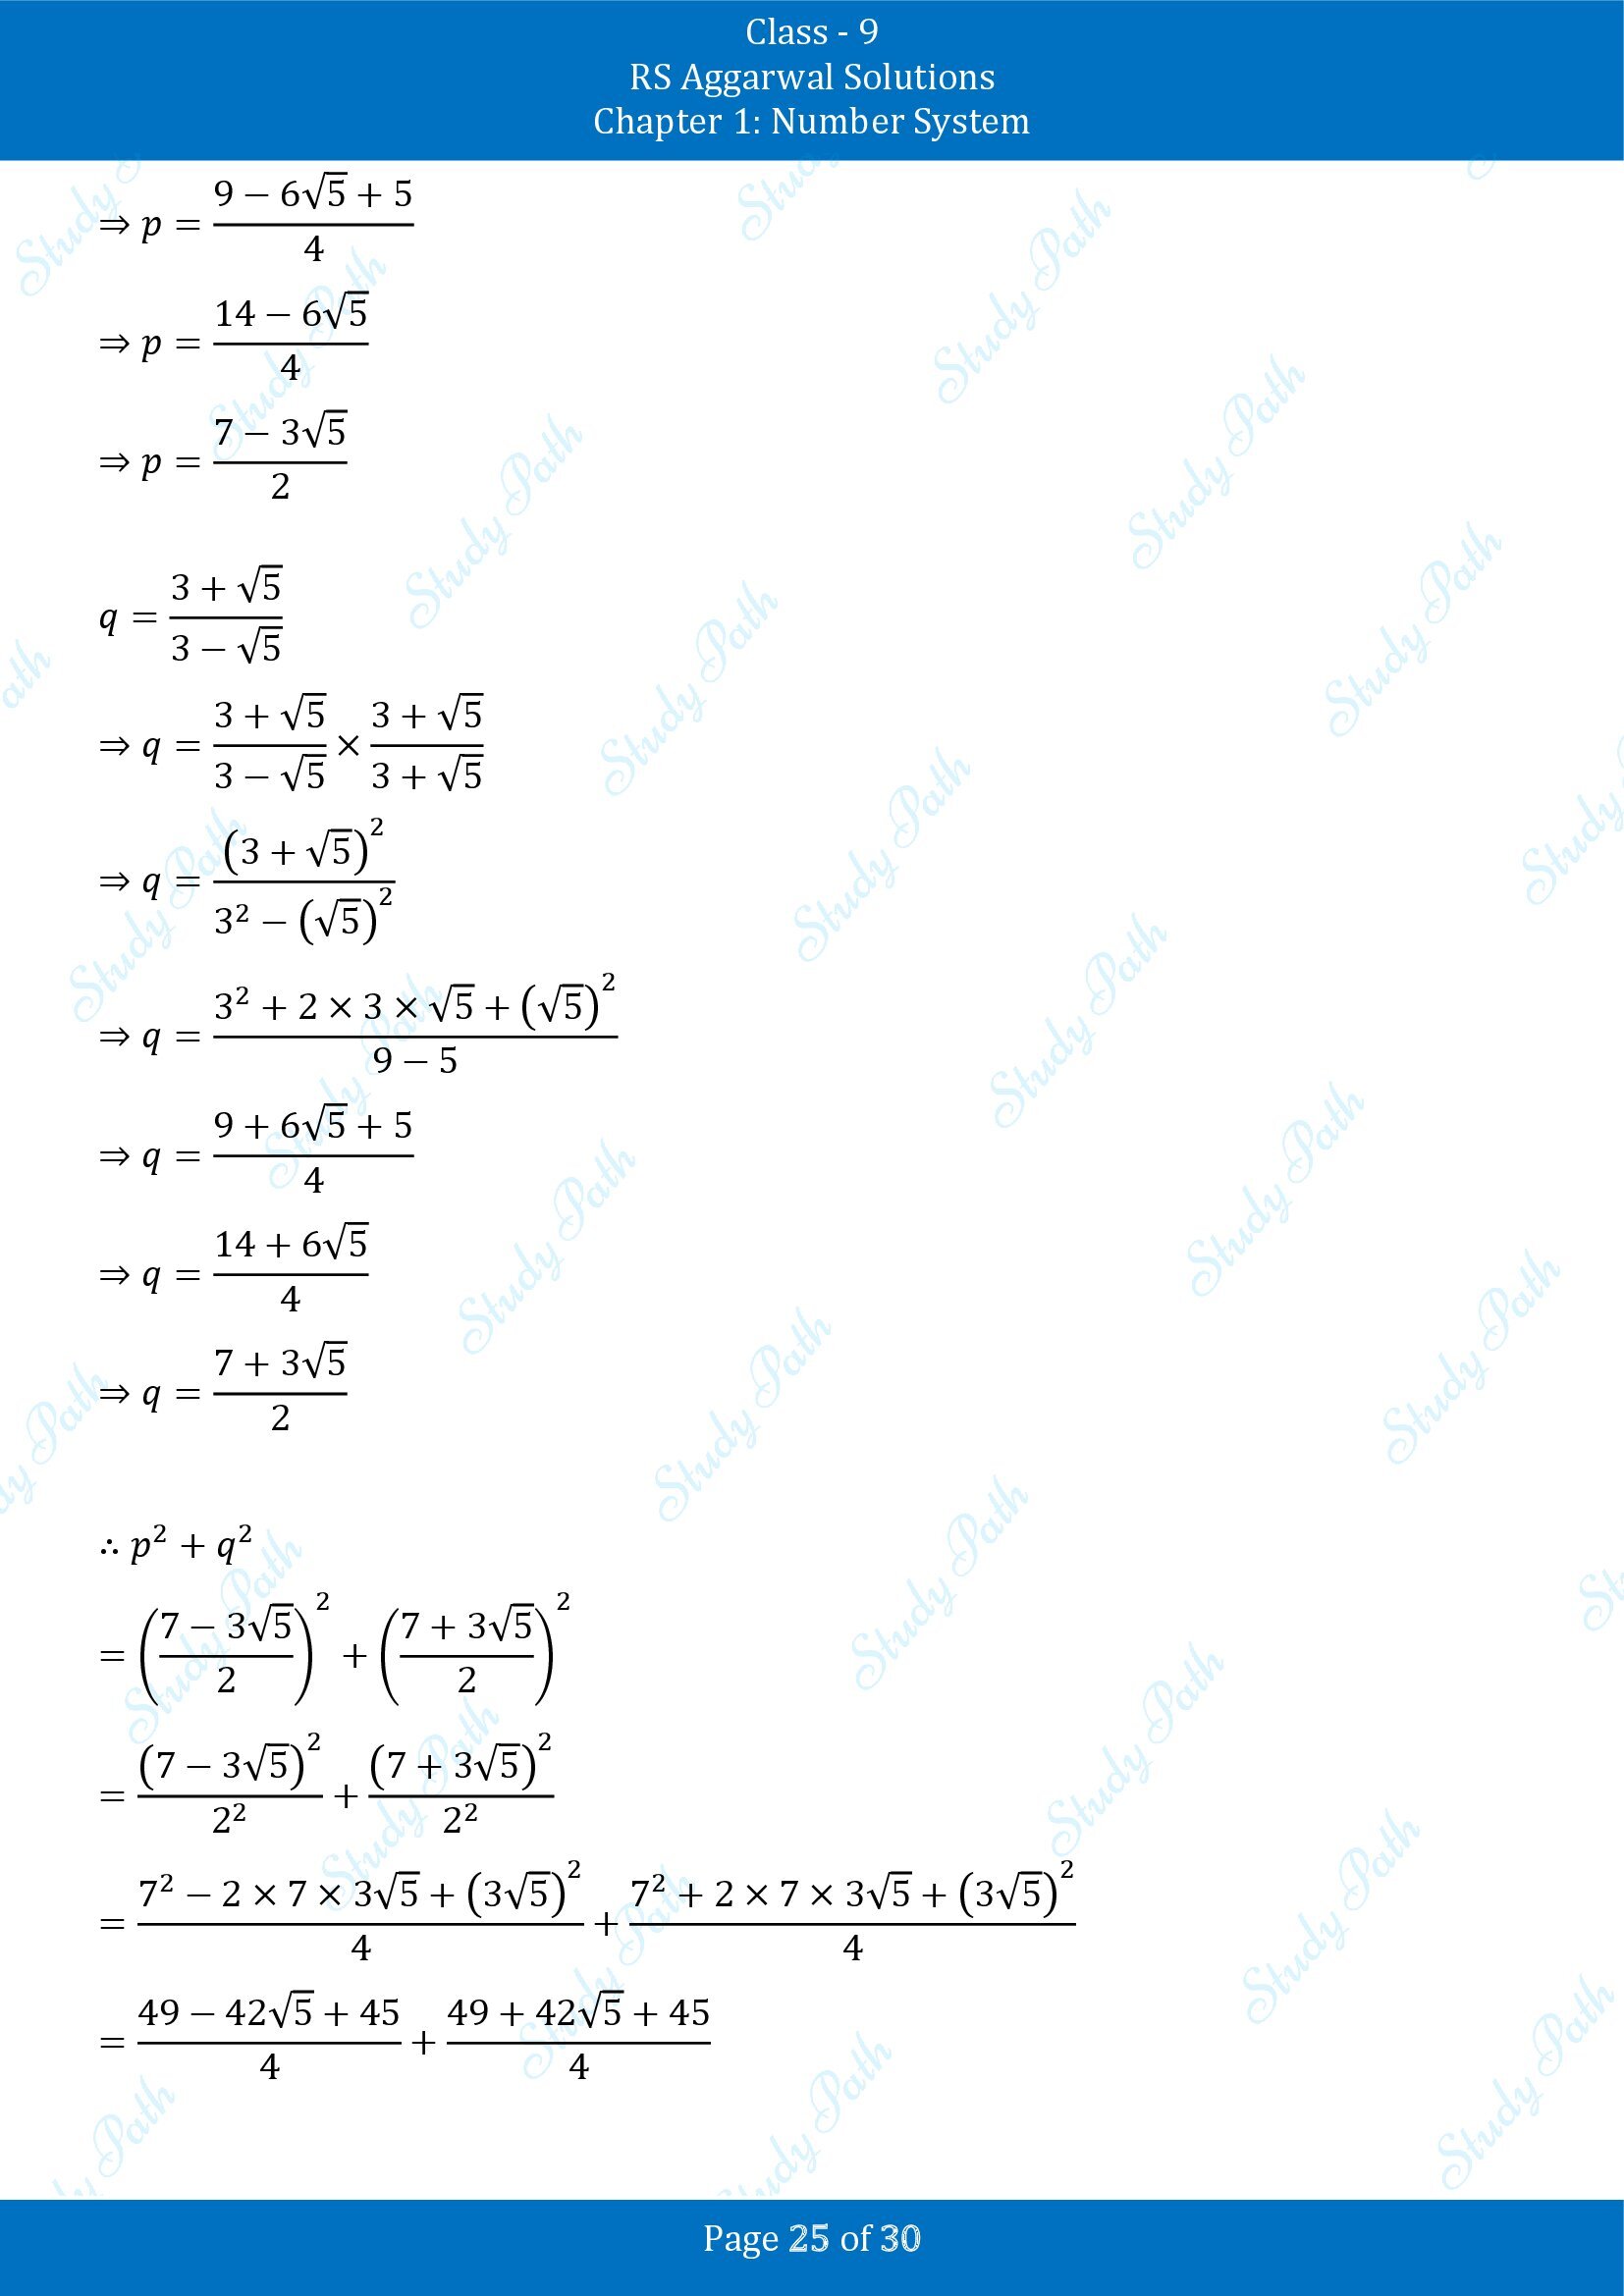 RS Aggarwal Solutions Class 9 Chapter 1 Number System Exercise 1F 00025